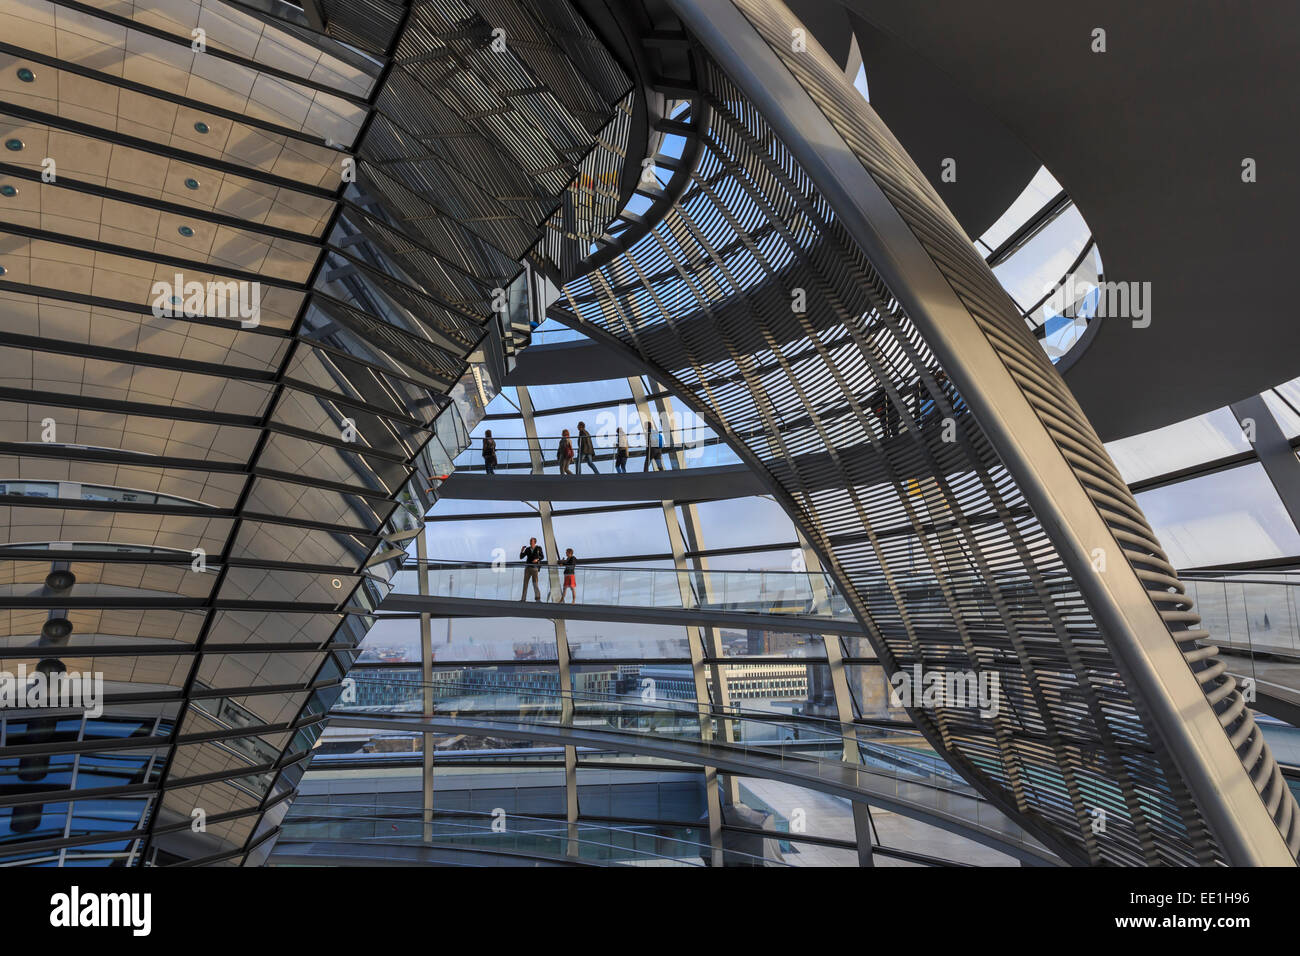 Reichstag dome interior with engaged visitors, early morning, Mitte, Berlin, Germany, Europe Stock Photo